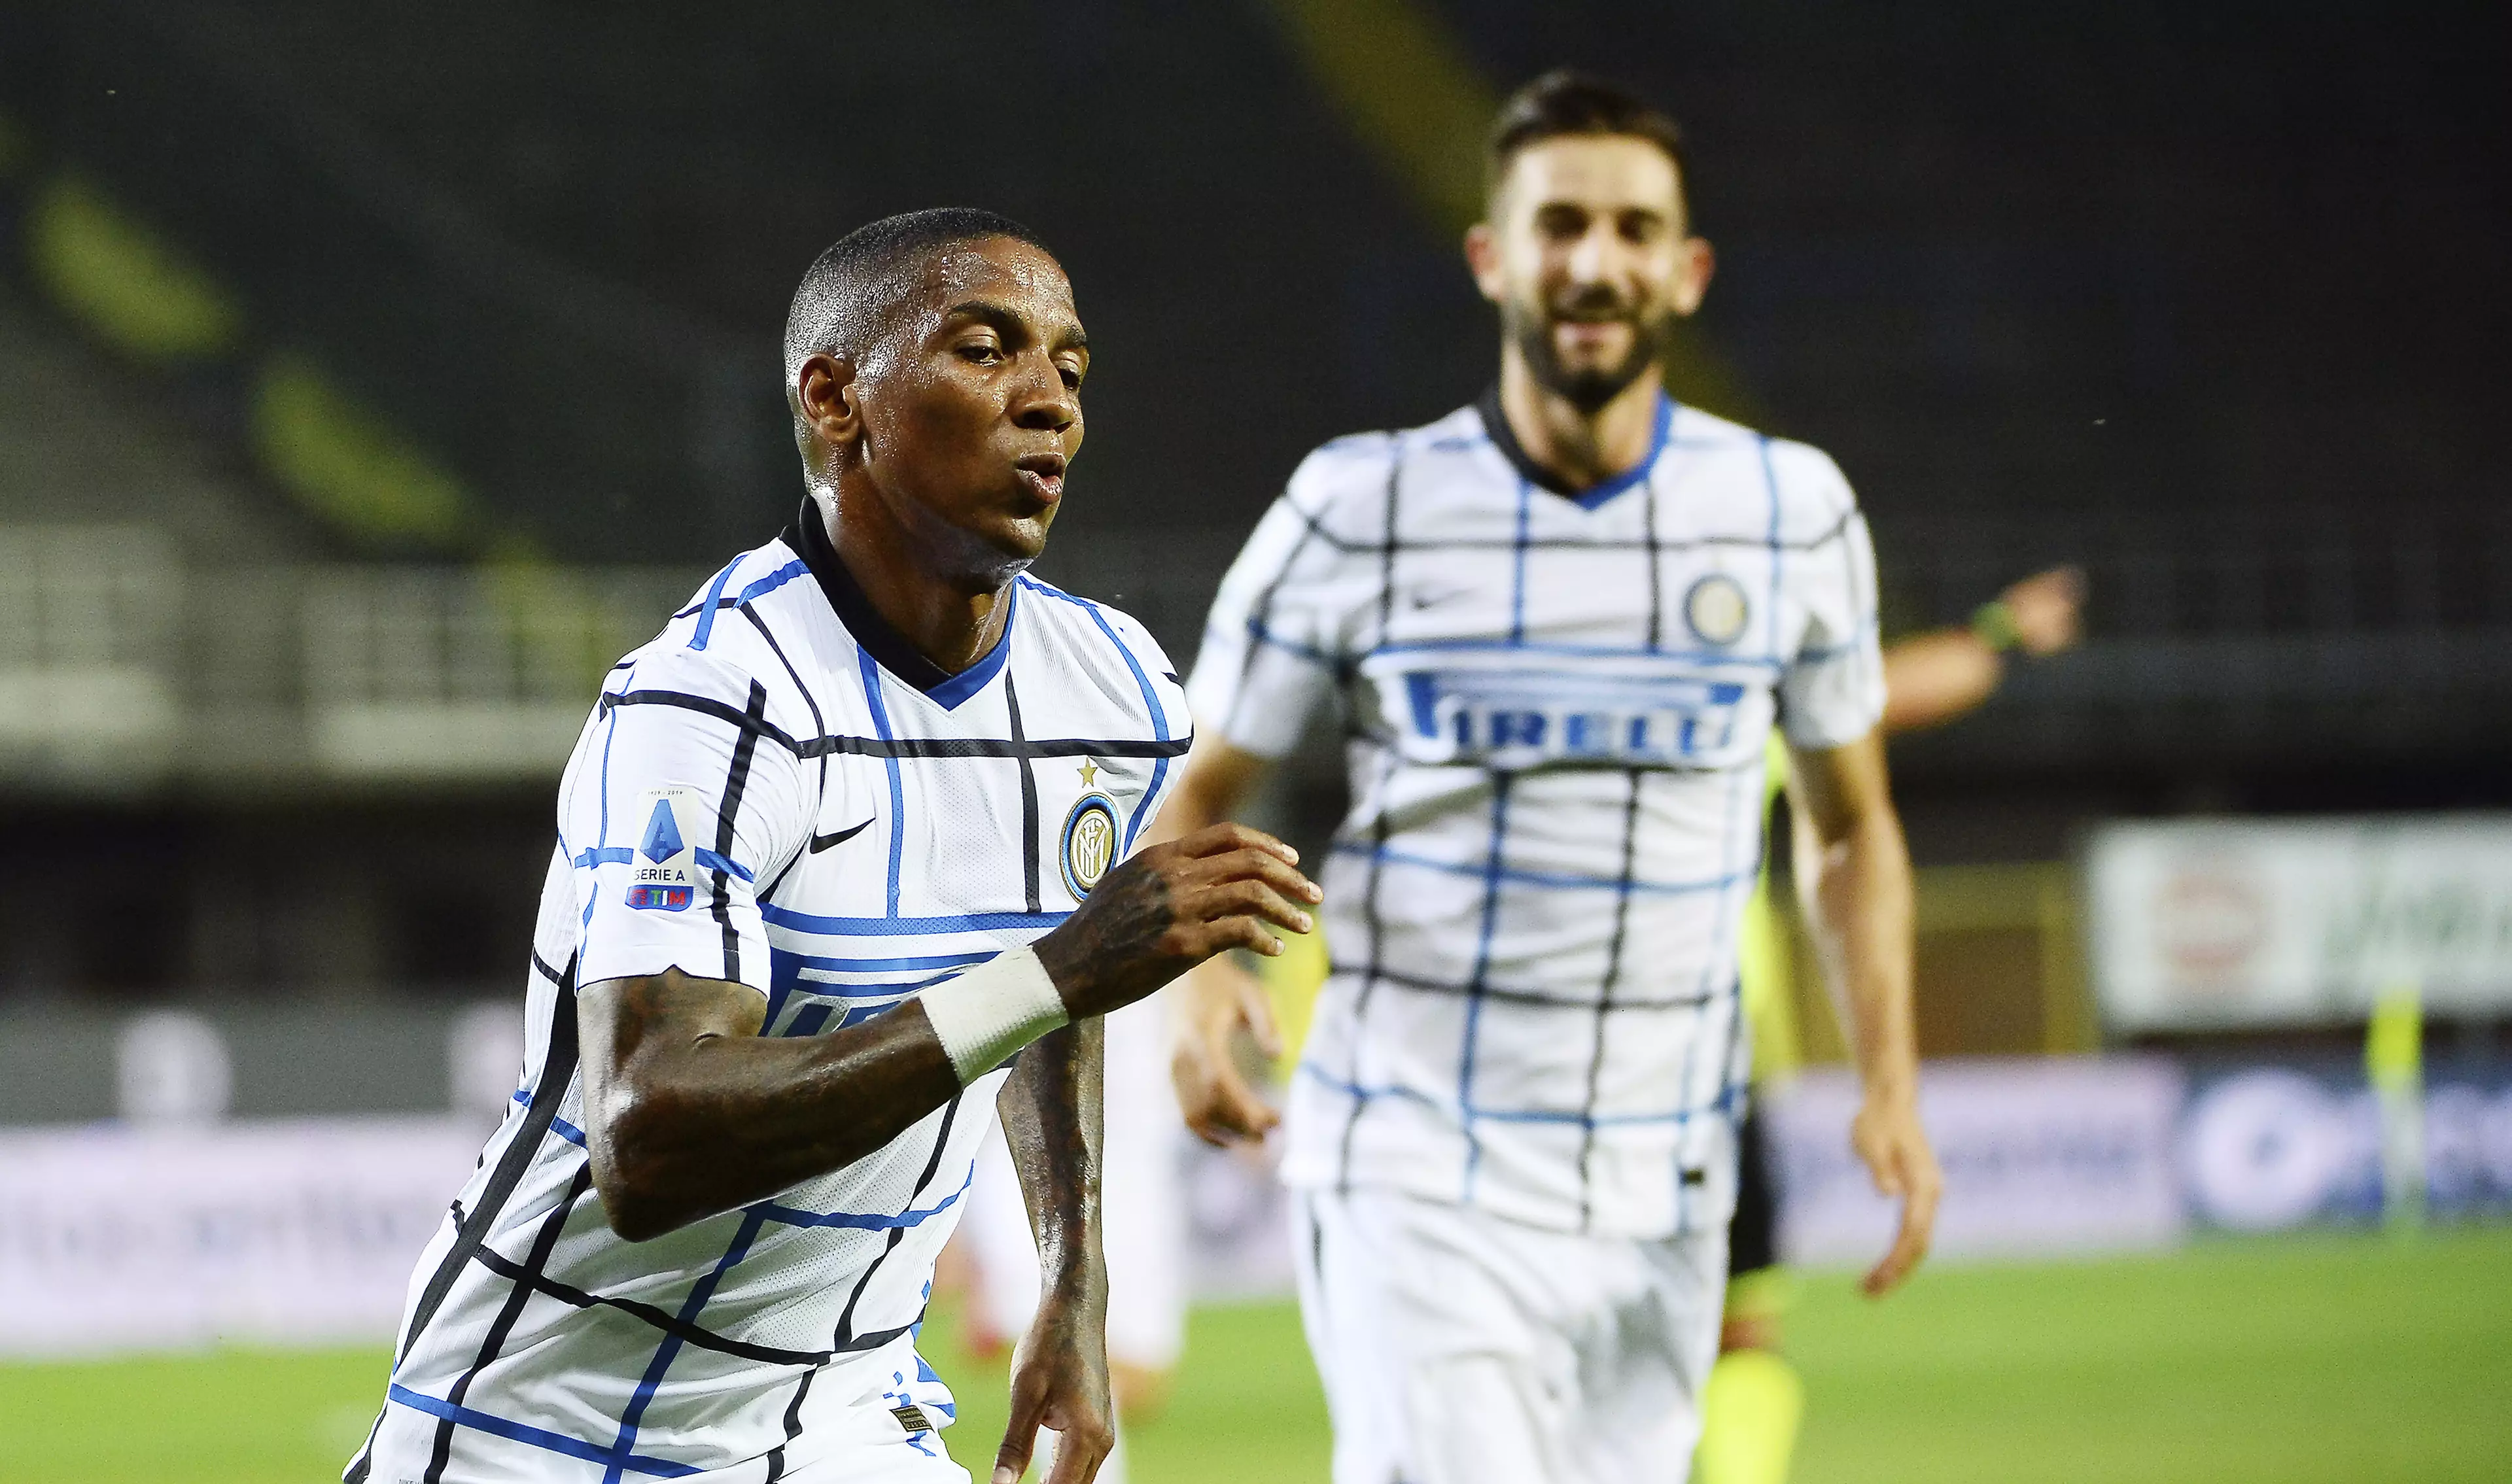 Ashley Young celebrates scoring Inter's second goal of the game. (Image